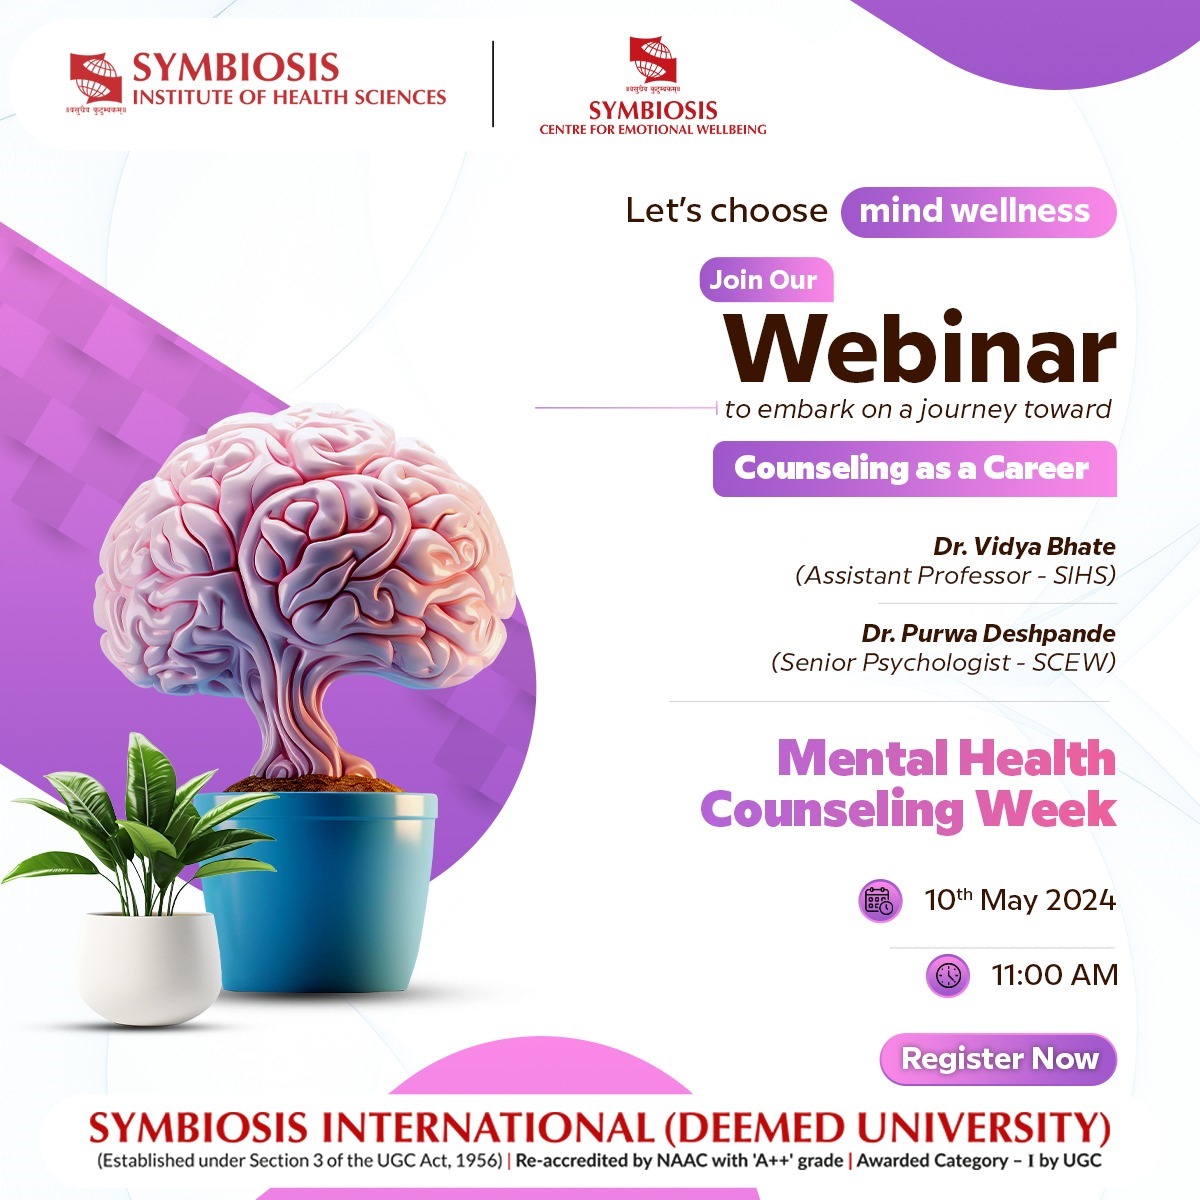 Understanding Mental Health Advocacy | Let's choose mind wellness
Join our webinar to embark on a journey toward counseling as a career

With Dr Vidya Bhate ( Assistant Professor - SIHS)
Dr Purwa Deshpande ( Senior Psychologist, SCEW)
Mental Health Counseling Week.